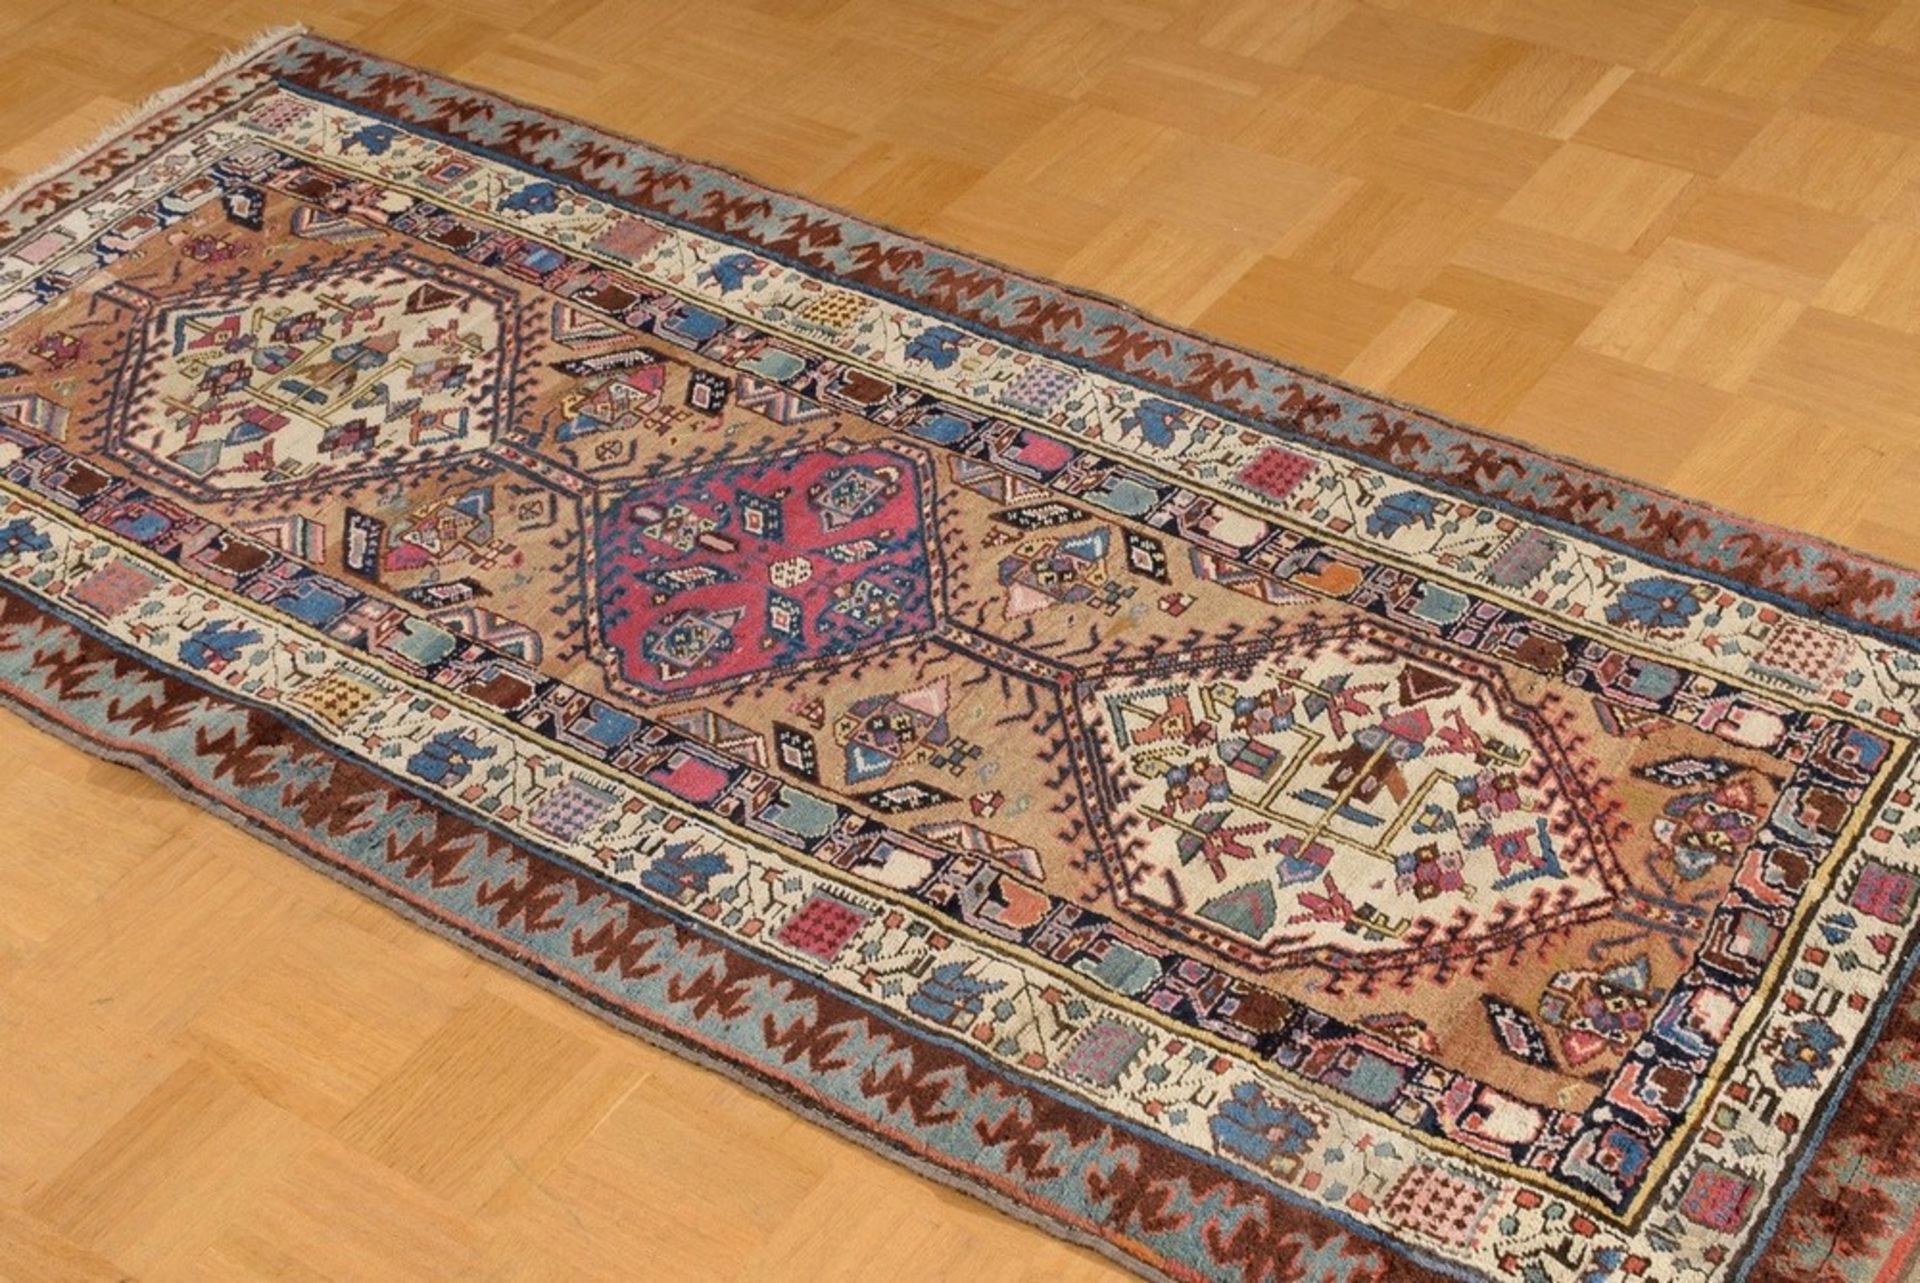 Serab carpet with a triple hexagonal-medallion and depictions of animals as well as a floral border - Image 2 of 6